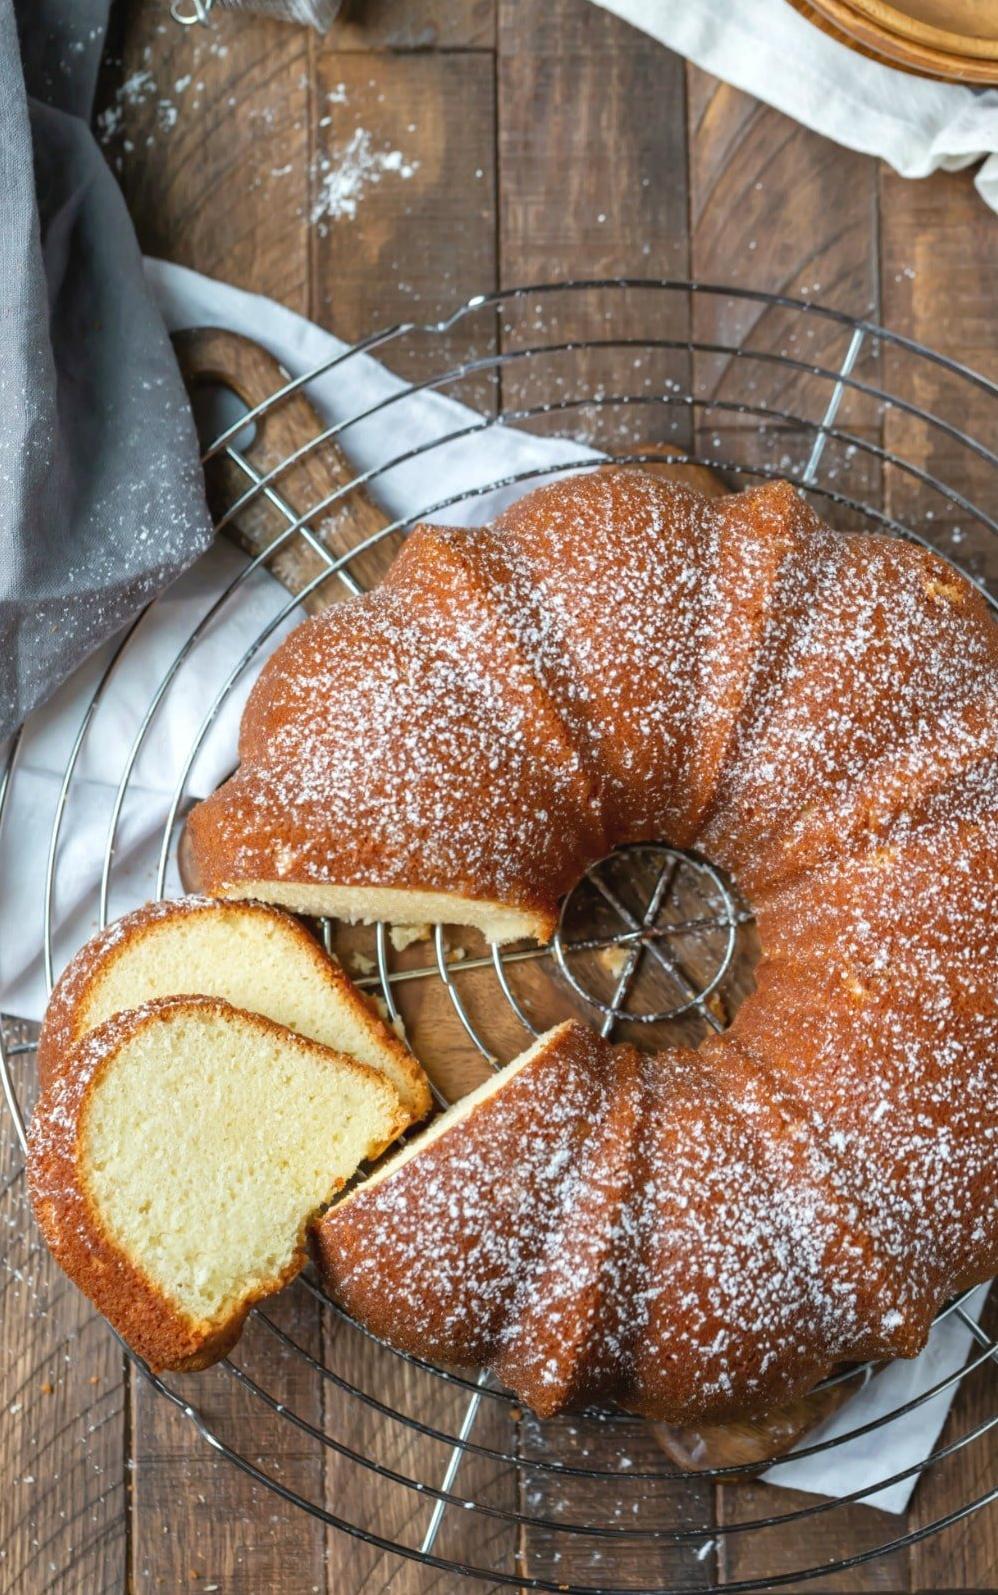  This pound cake is a mouthwatering treat with its moist crumb and tangy flavor.